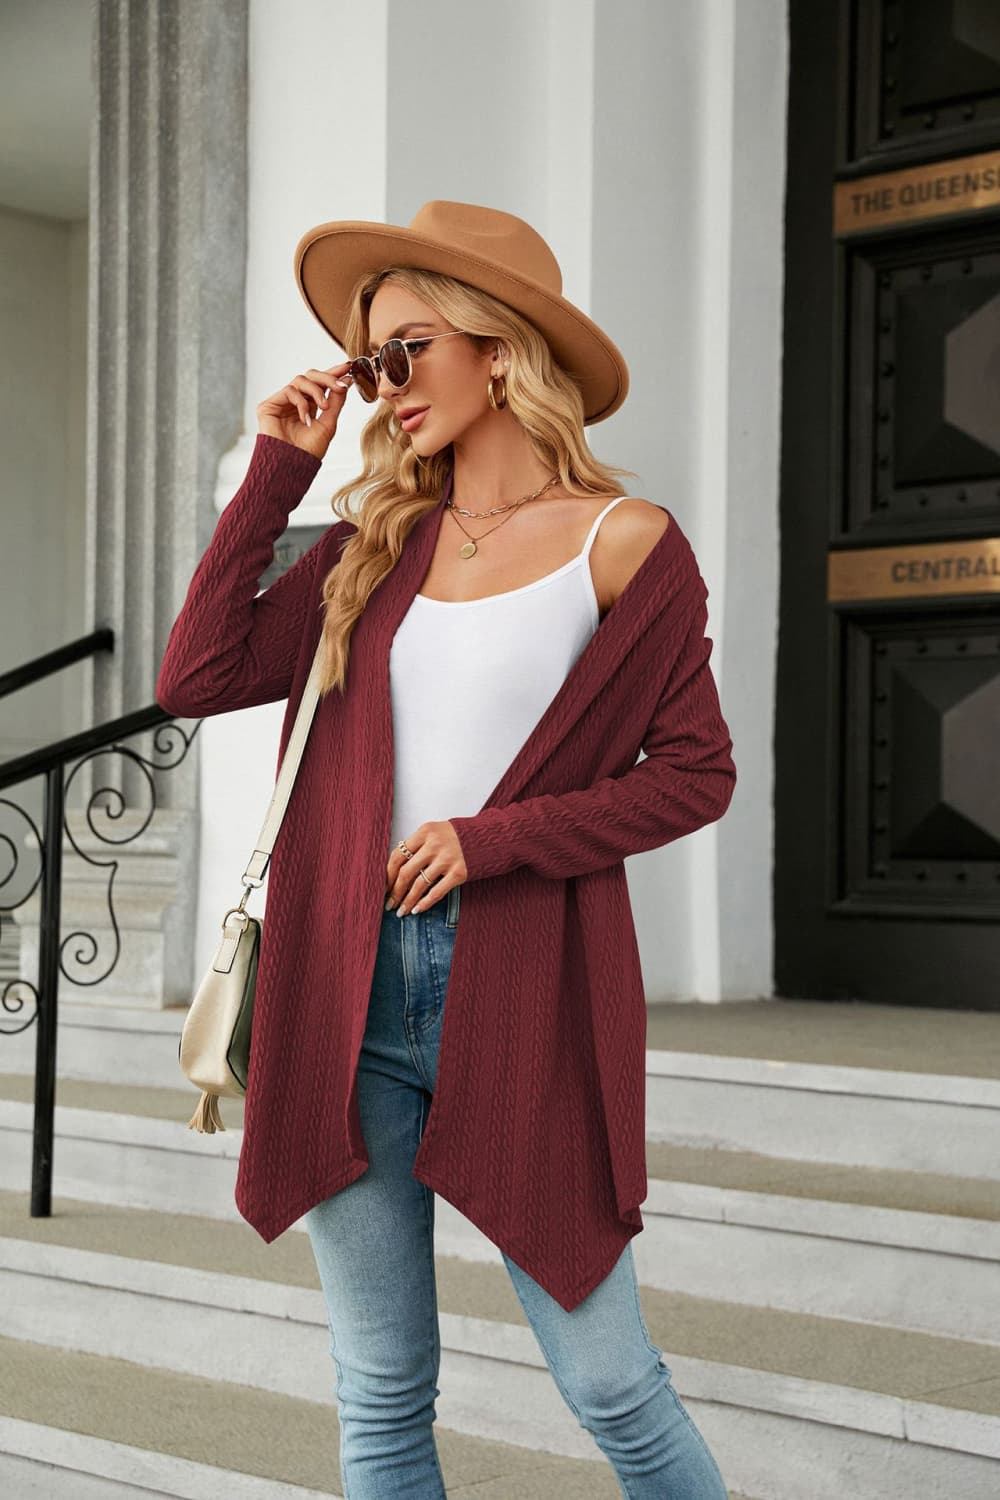 Long Sleeve Cardigan - Women’s Clothing & Accessories - Shirts & Tops - 20 - 2024